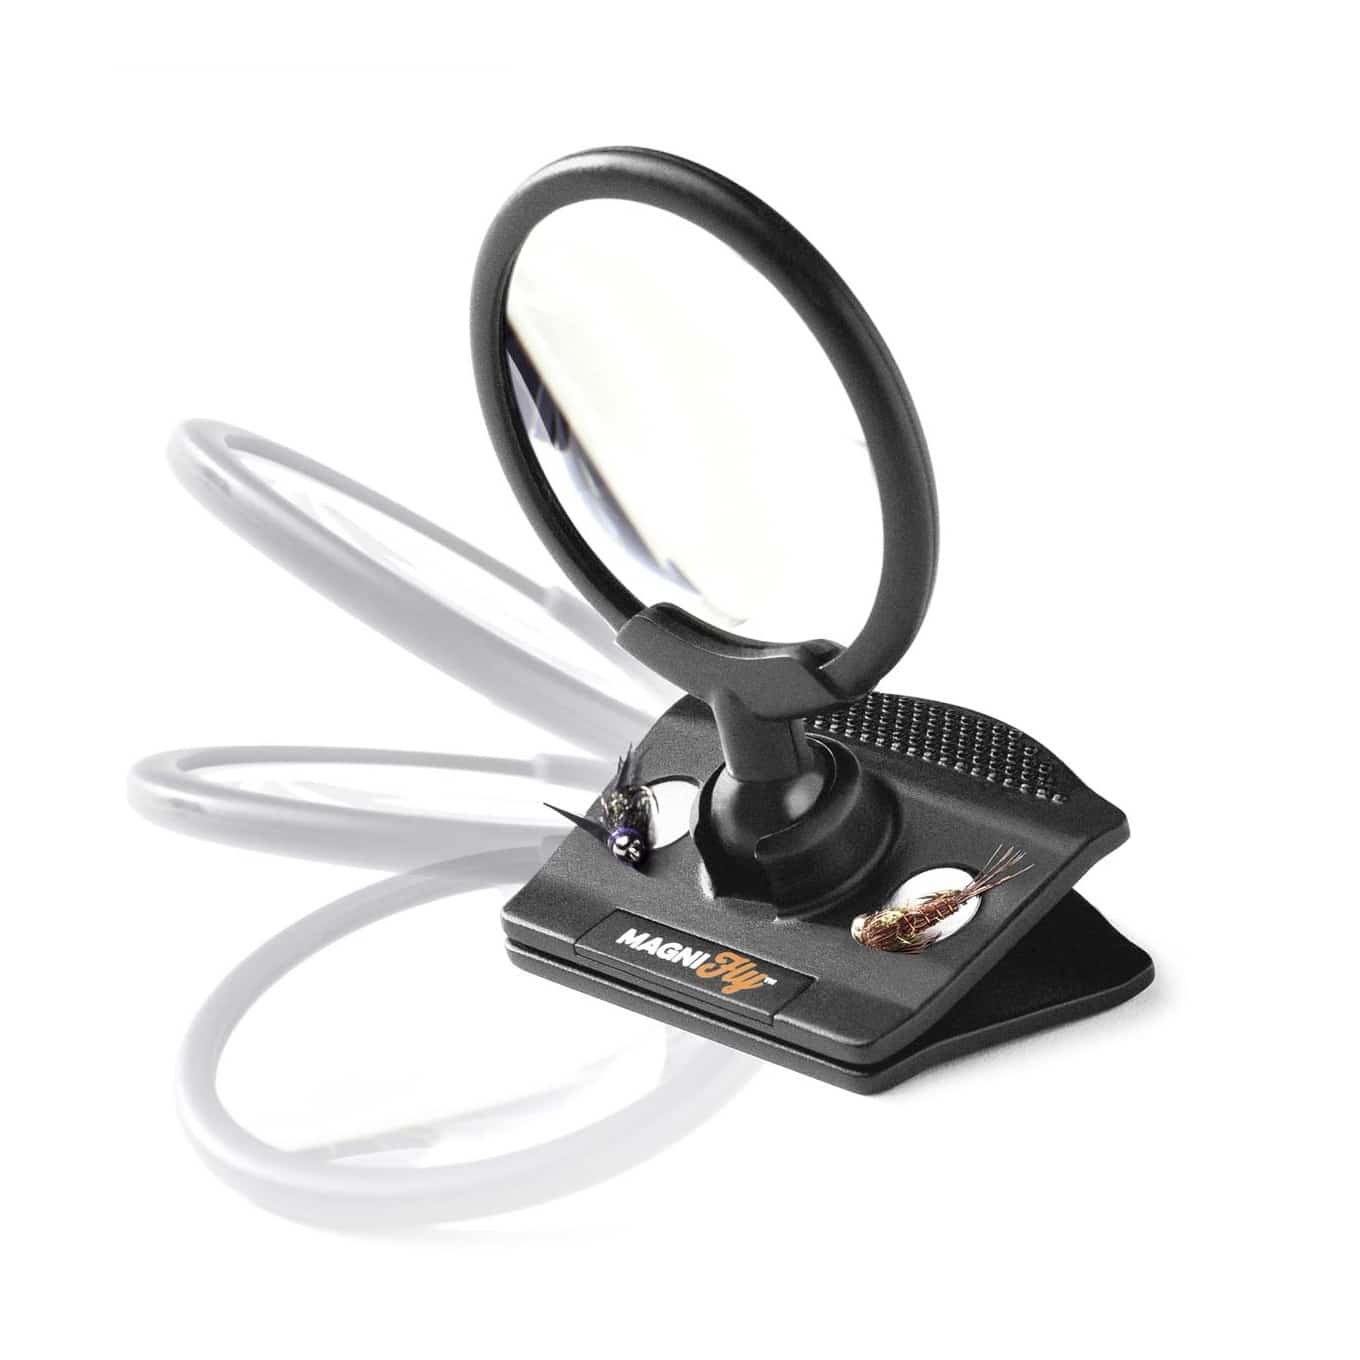 Magnifiers for Fly Fishers - Simpson Fly Fishing